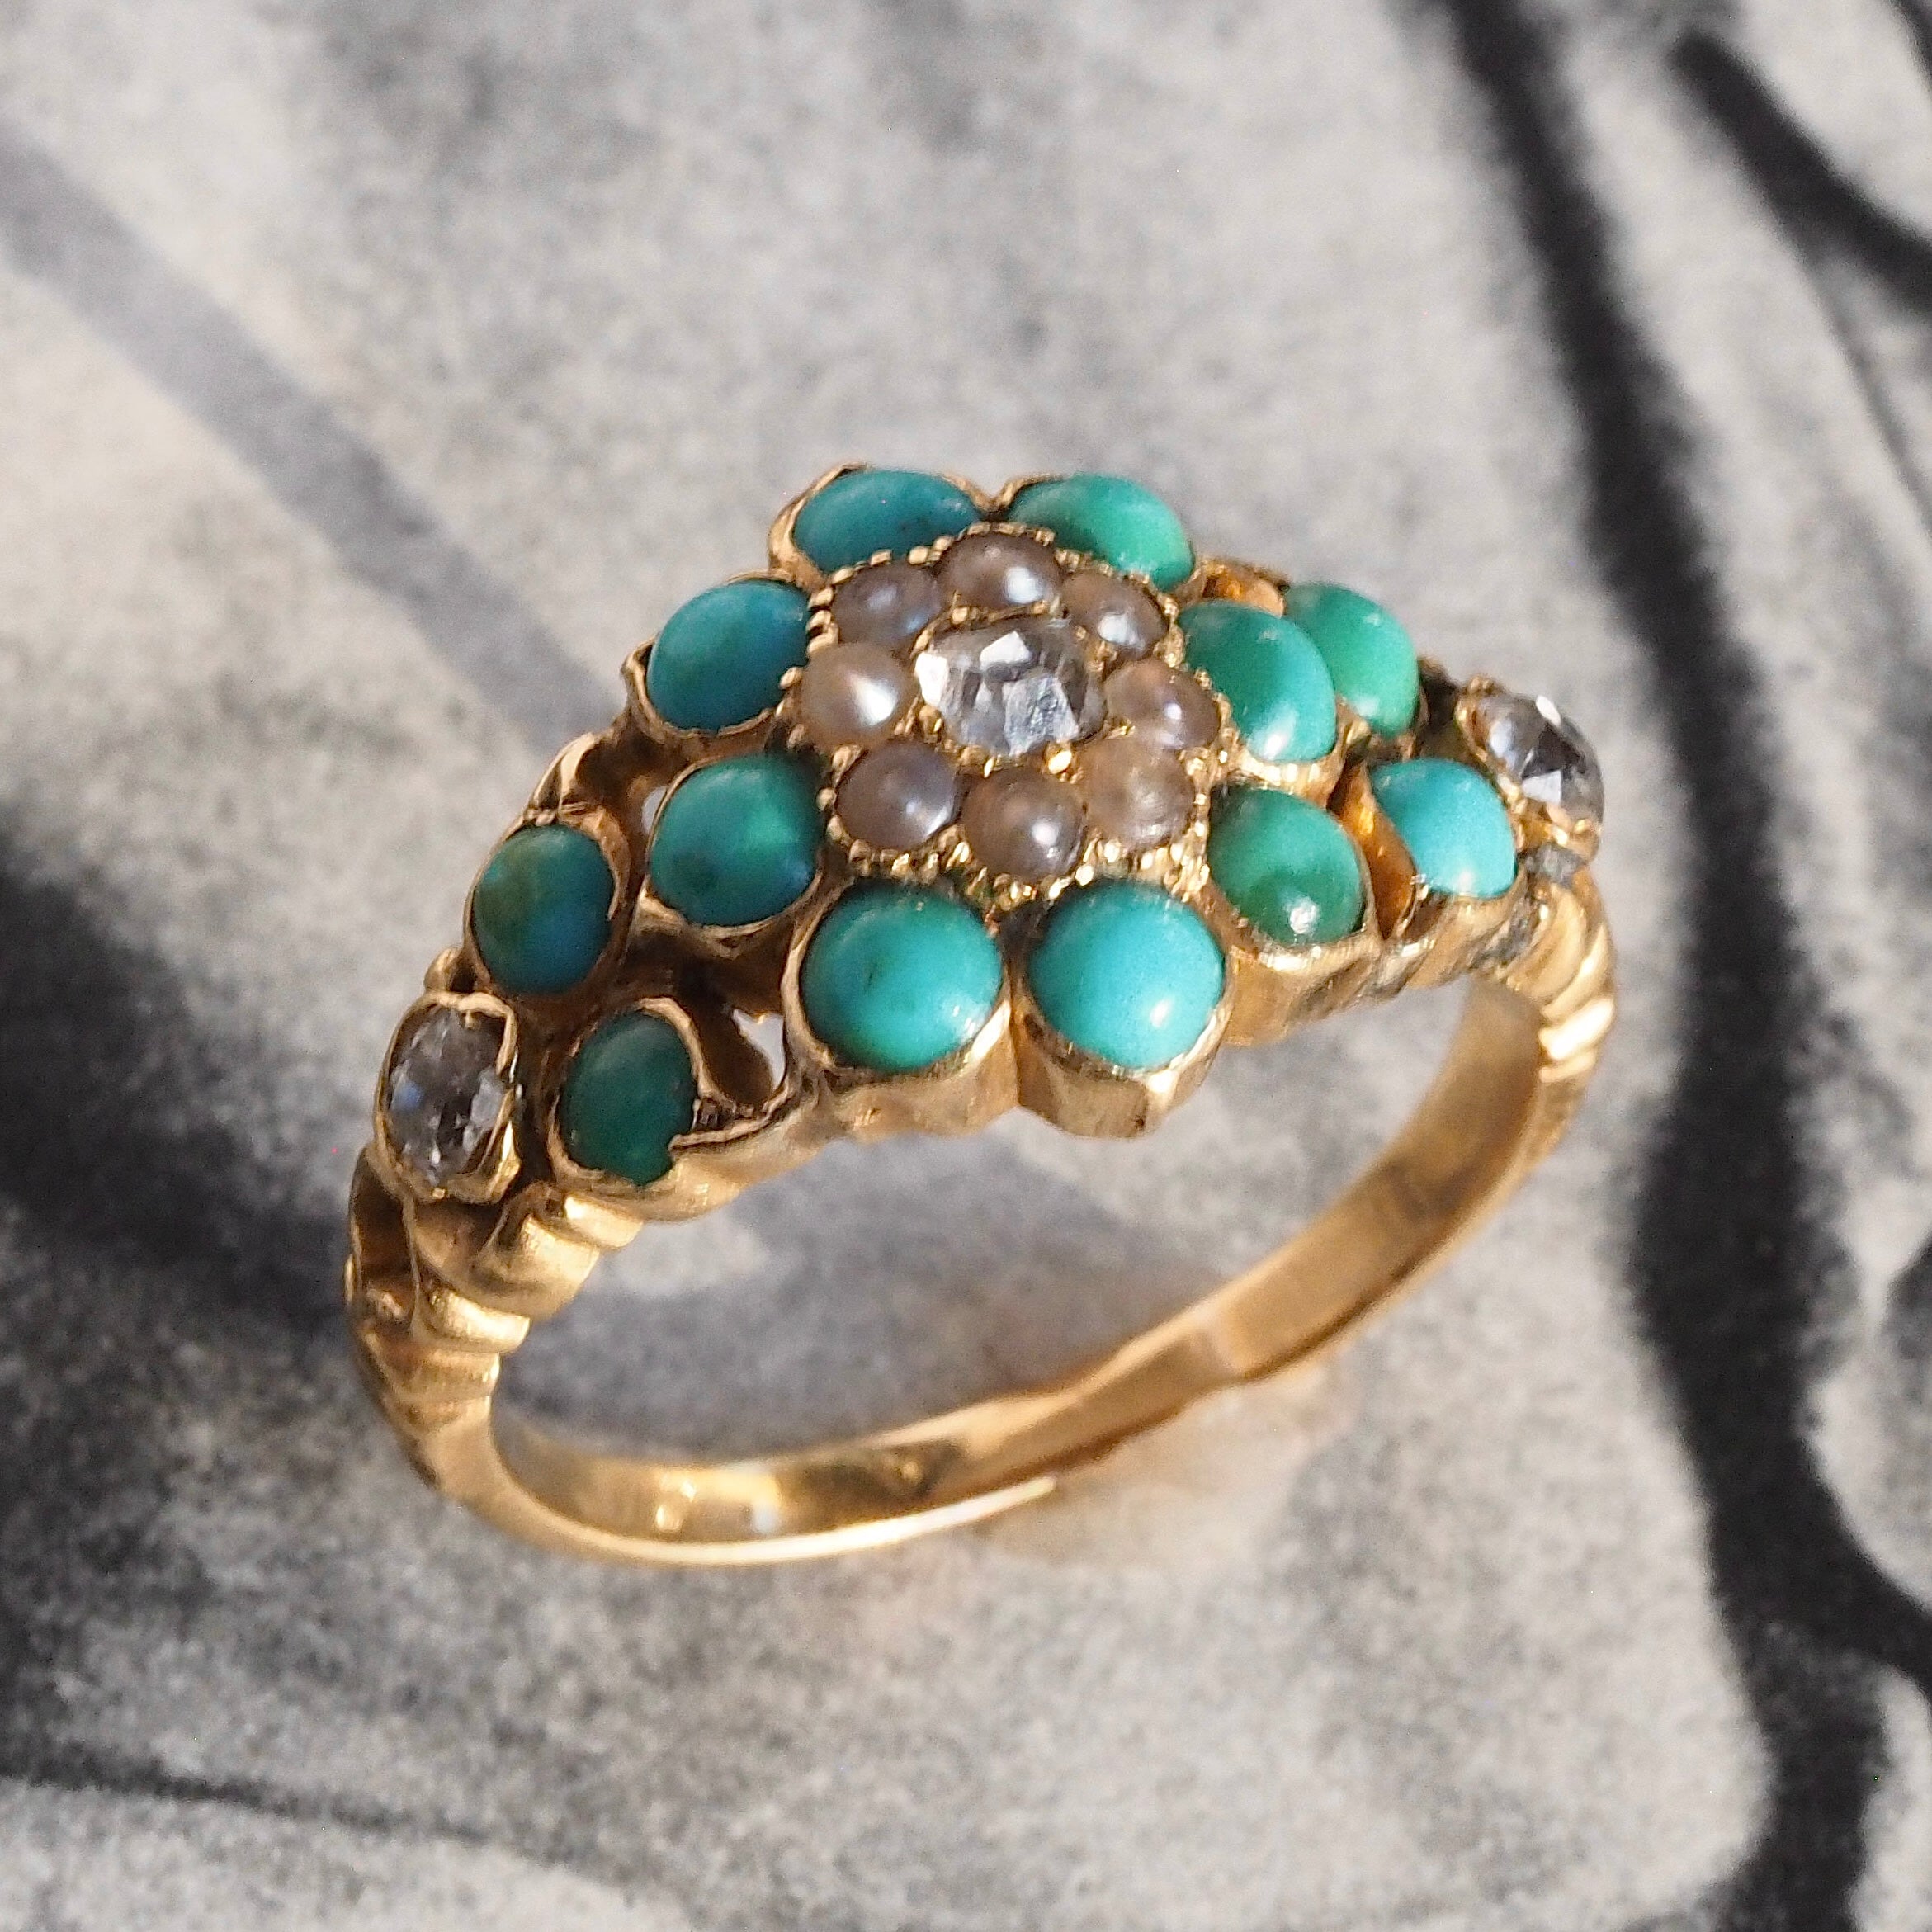 Antique Georgian 18k Gold Turquoise, Pearl and Diamond Ring